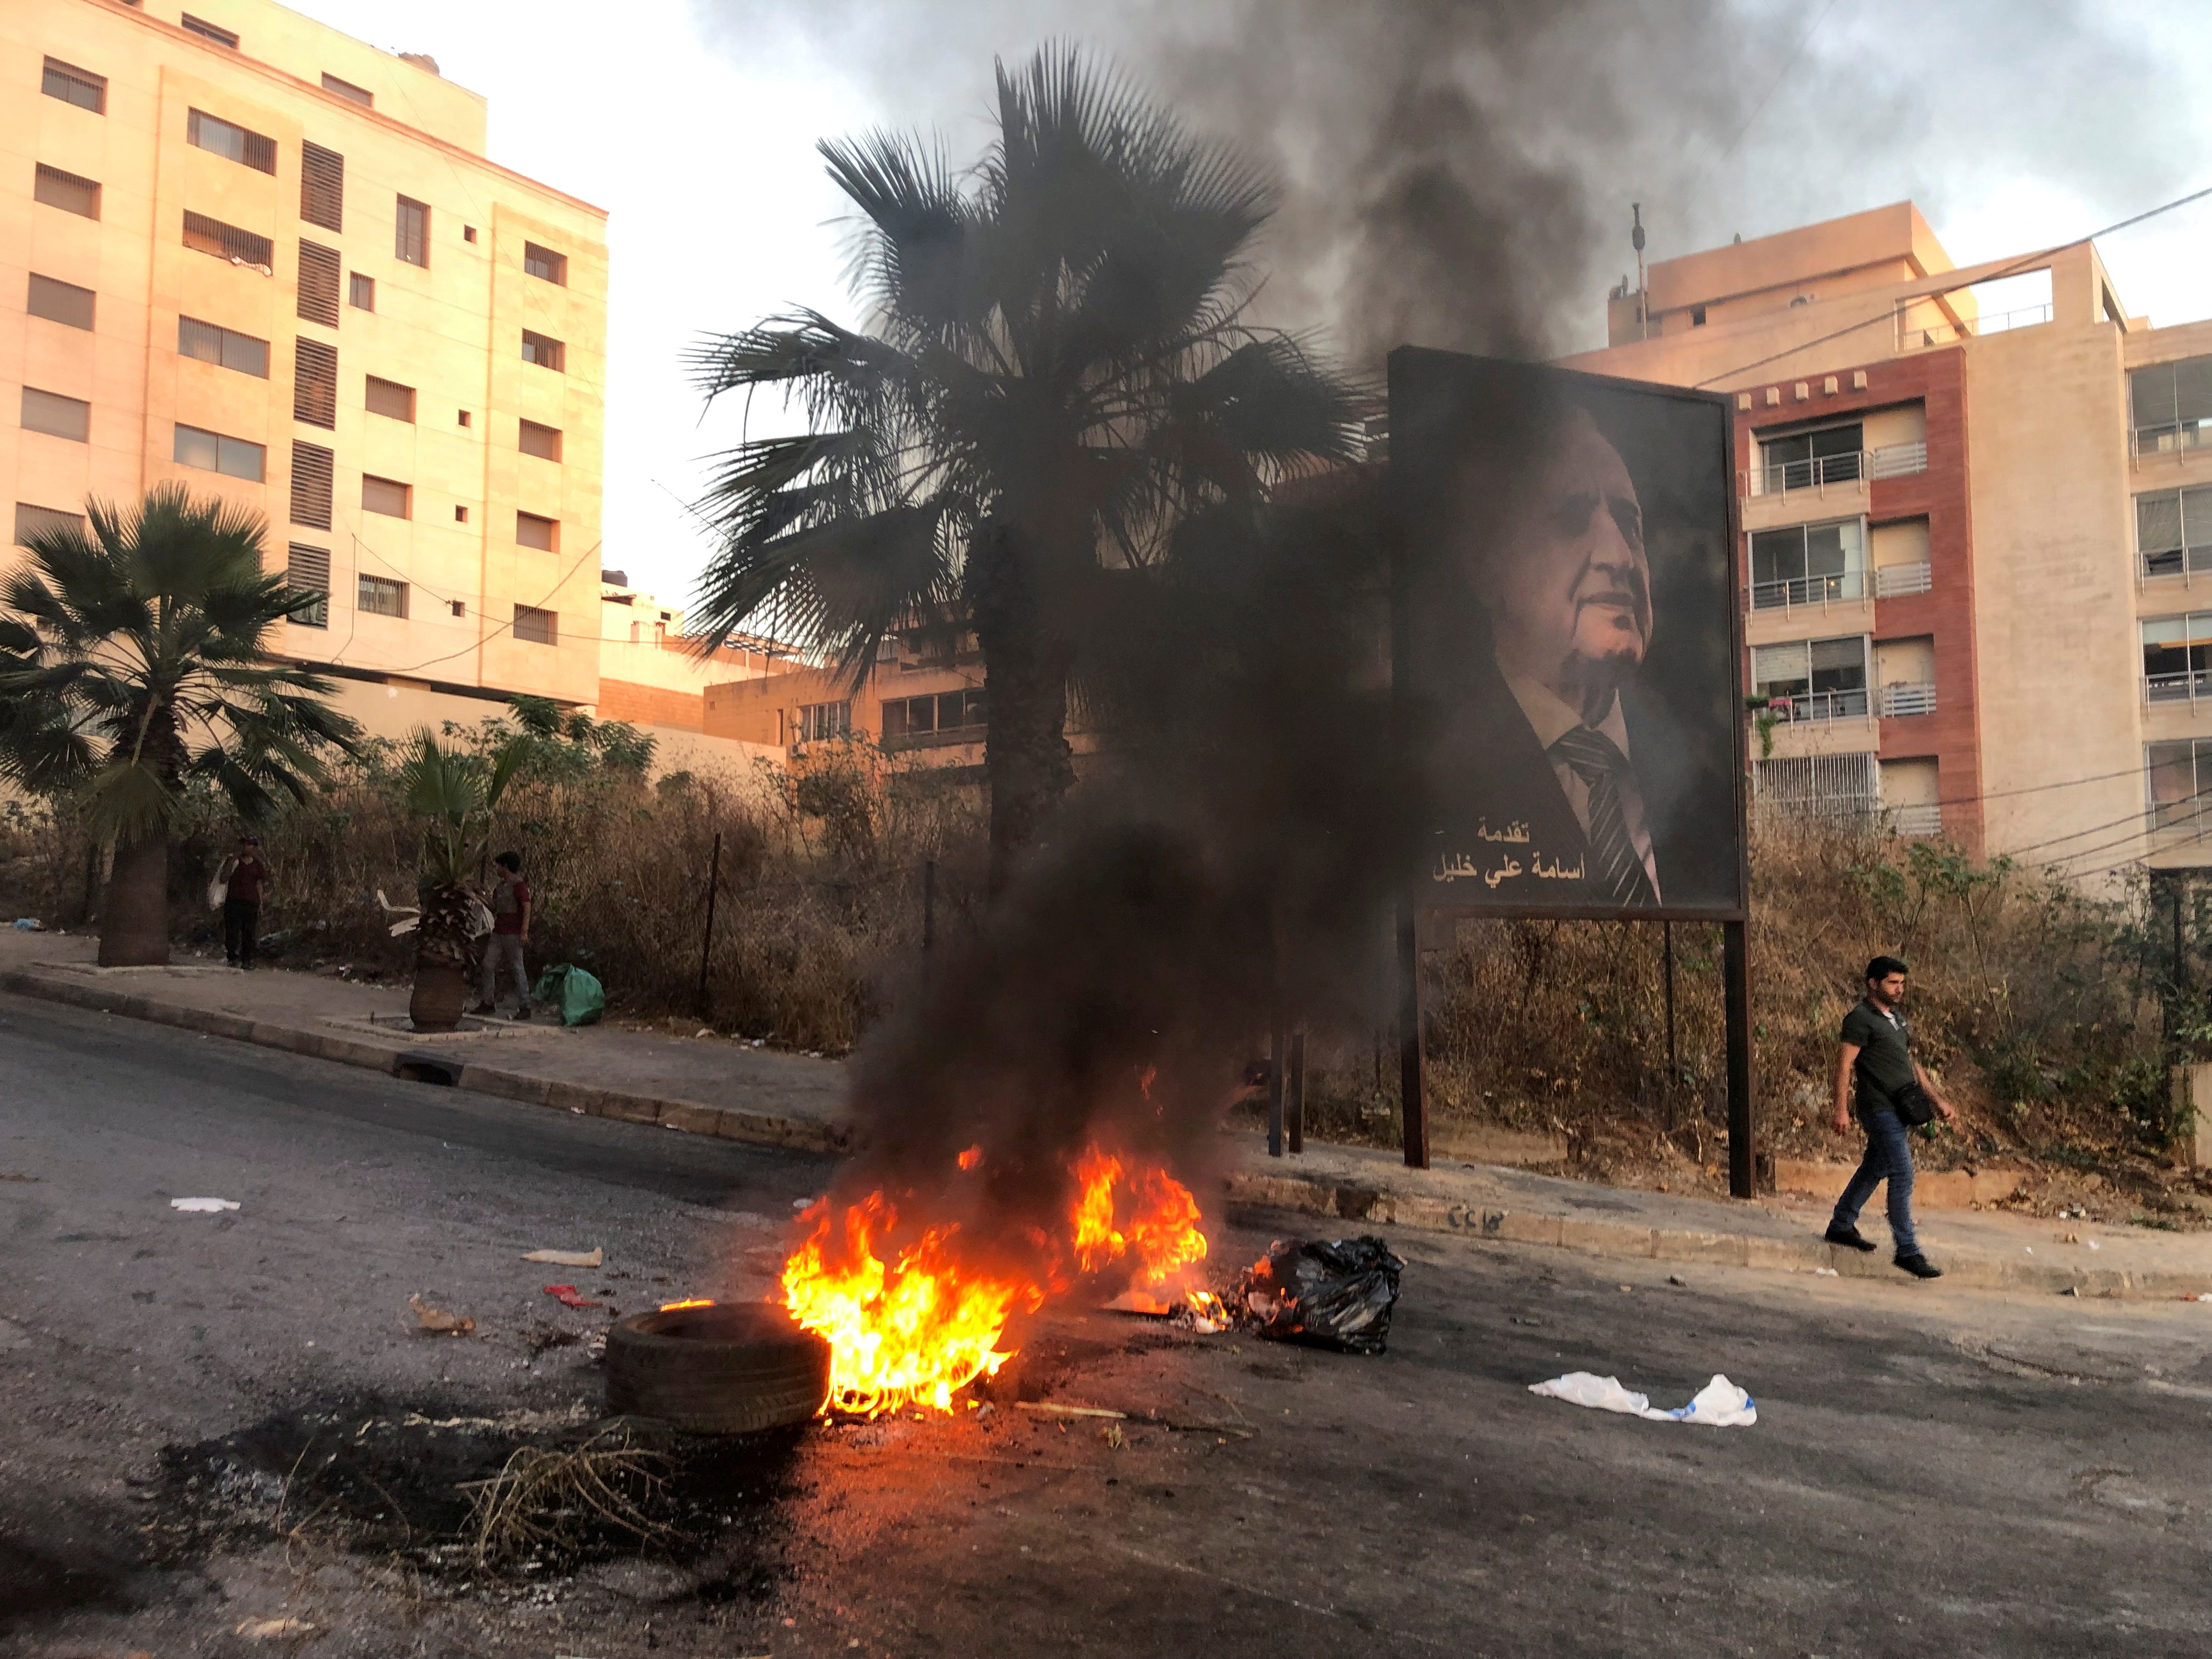 A man walks near a burning fire blocking a road, during a protest against mounting economic hardships, in Beirut